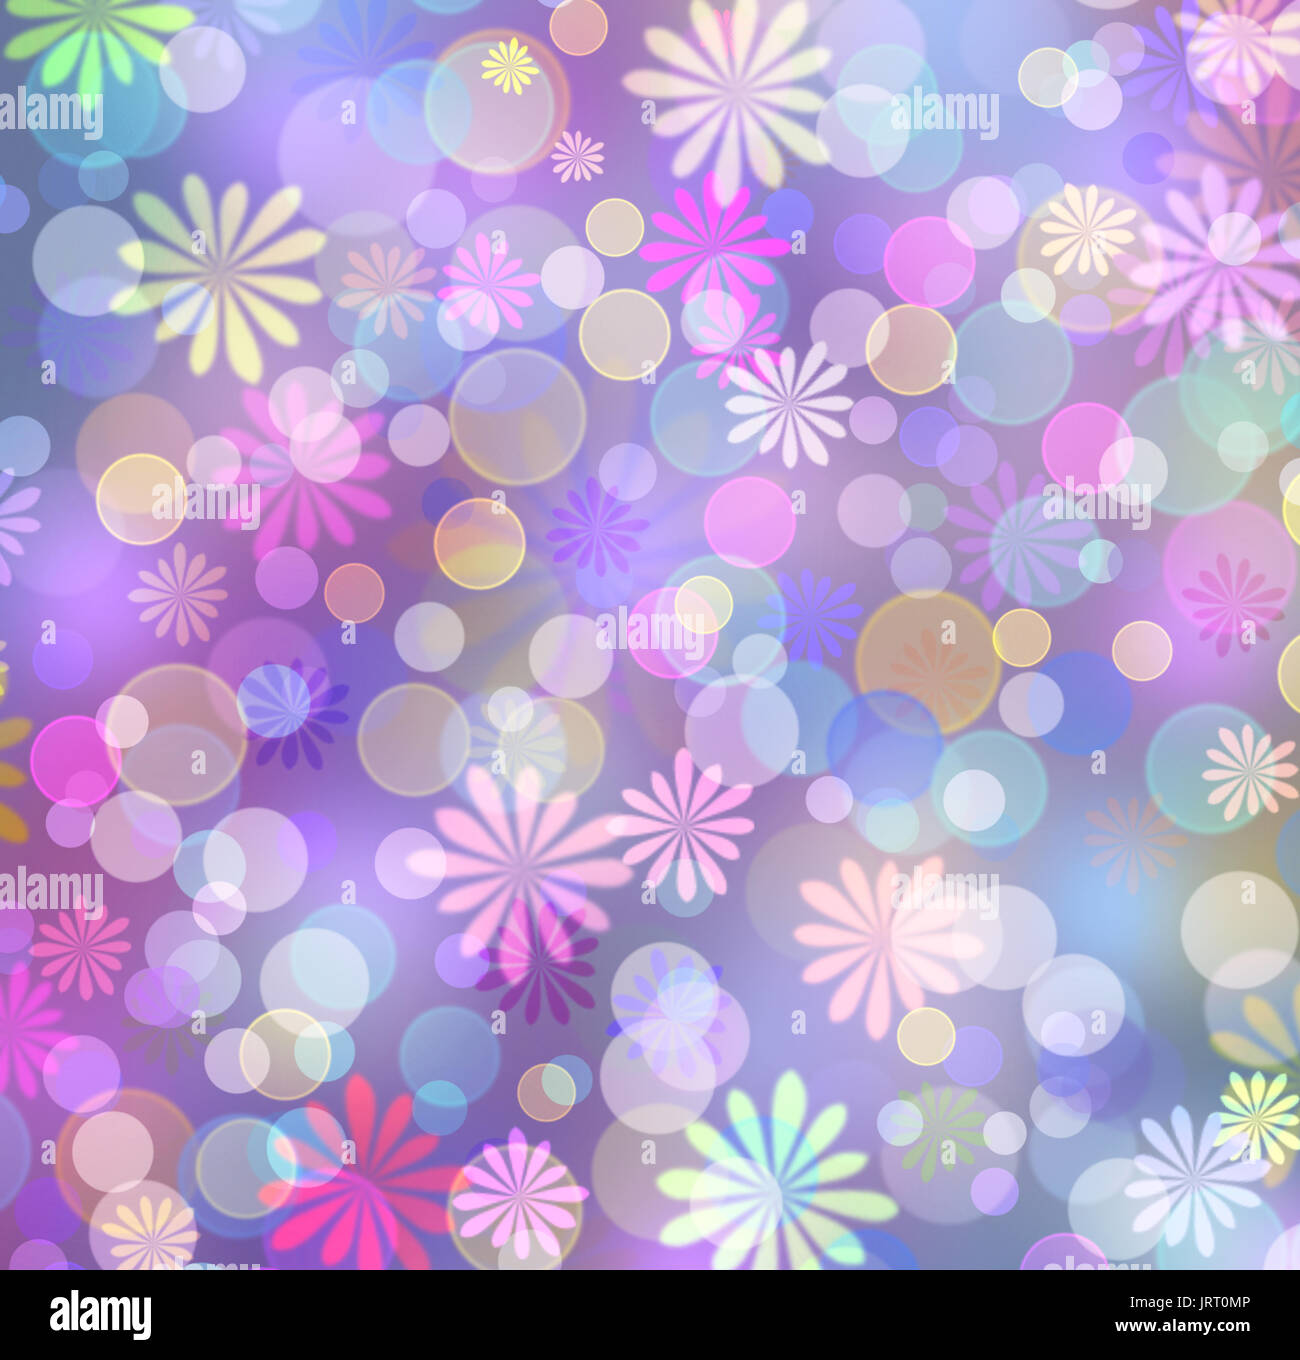 Illustration of colorful abstract background Stock Photo